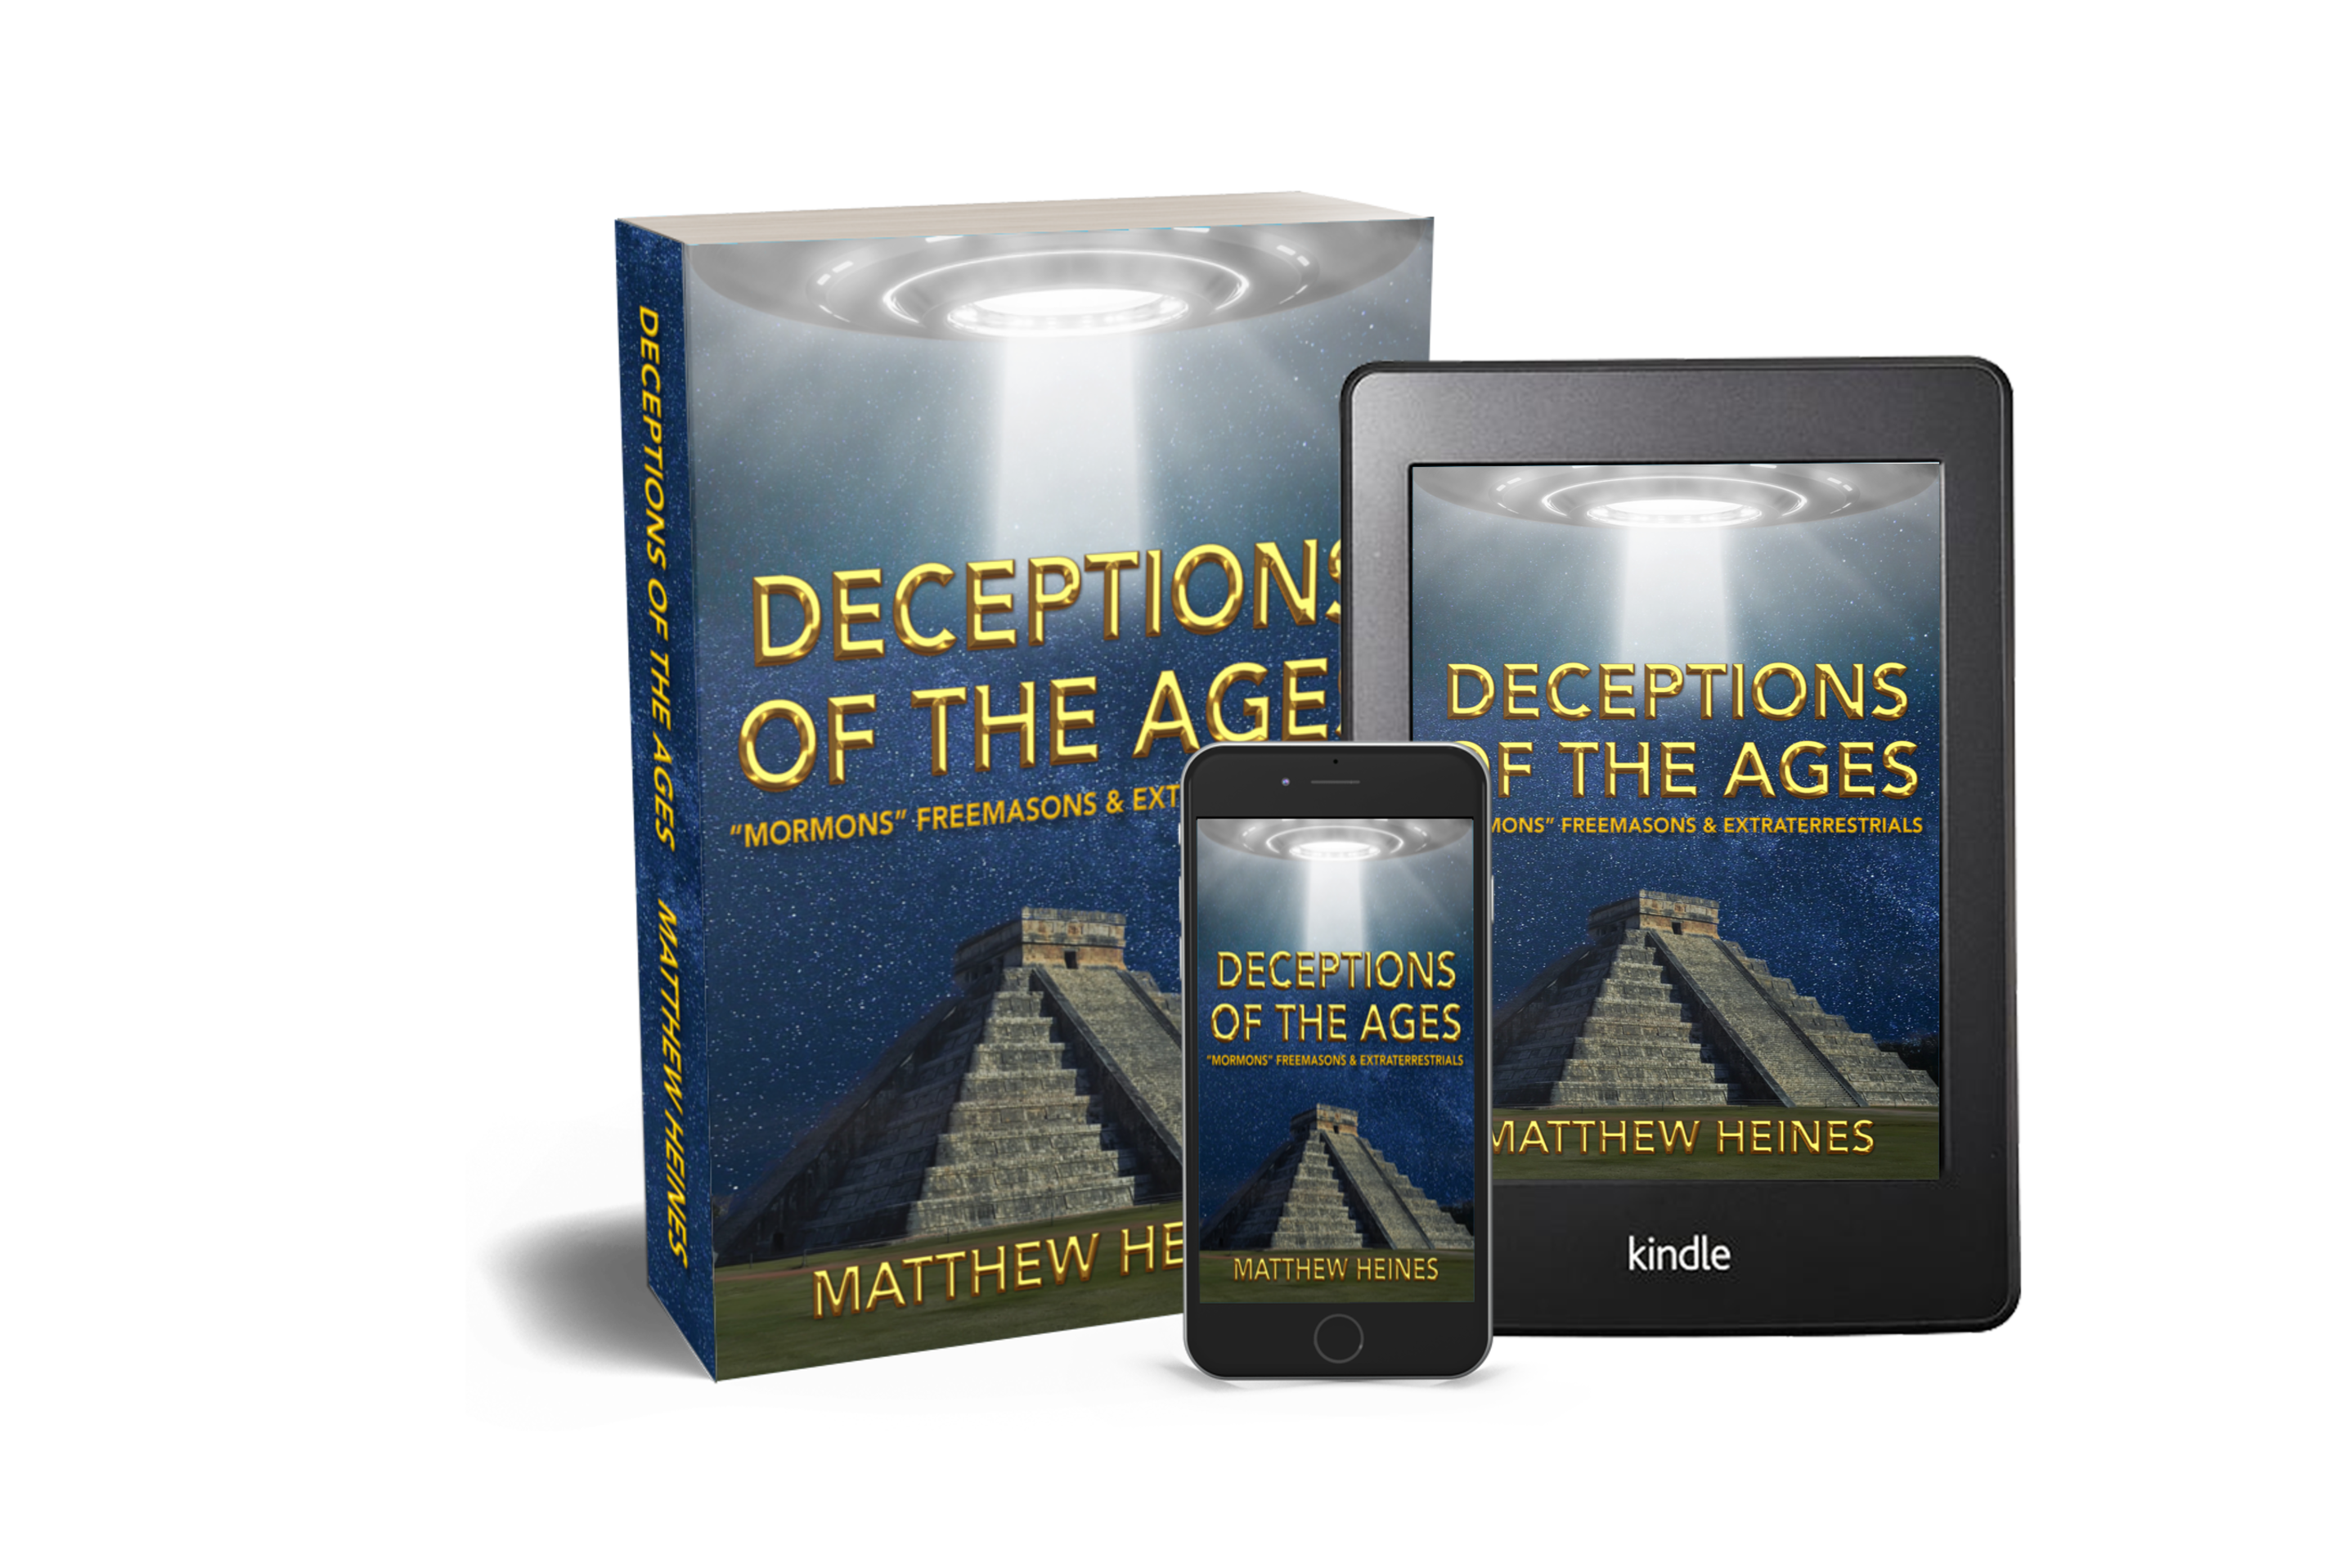 Deceptions of the Ages: “Mormons” Freemasons and Extraterrestrials